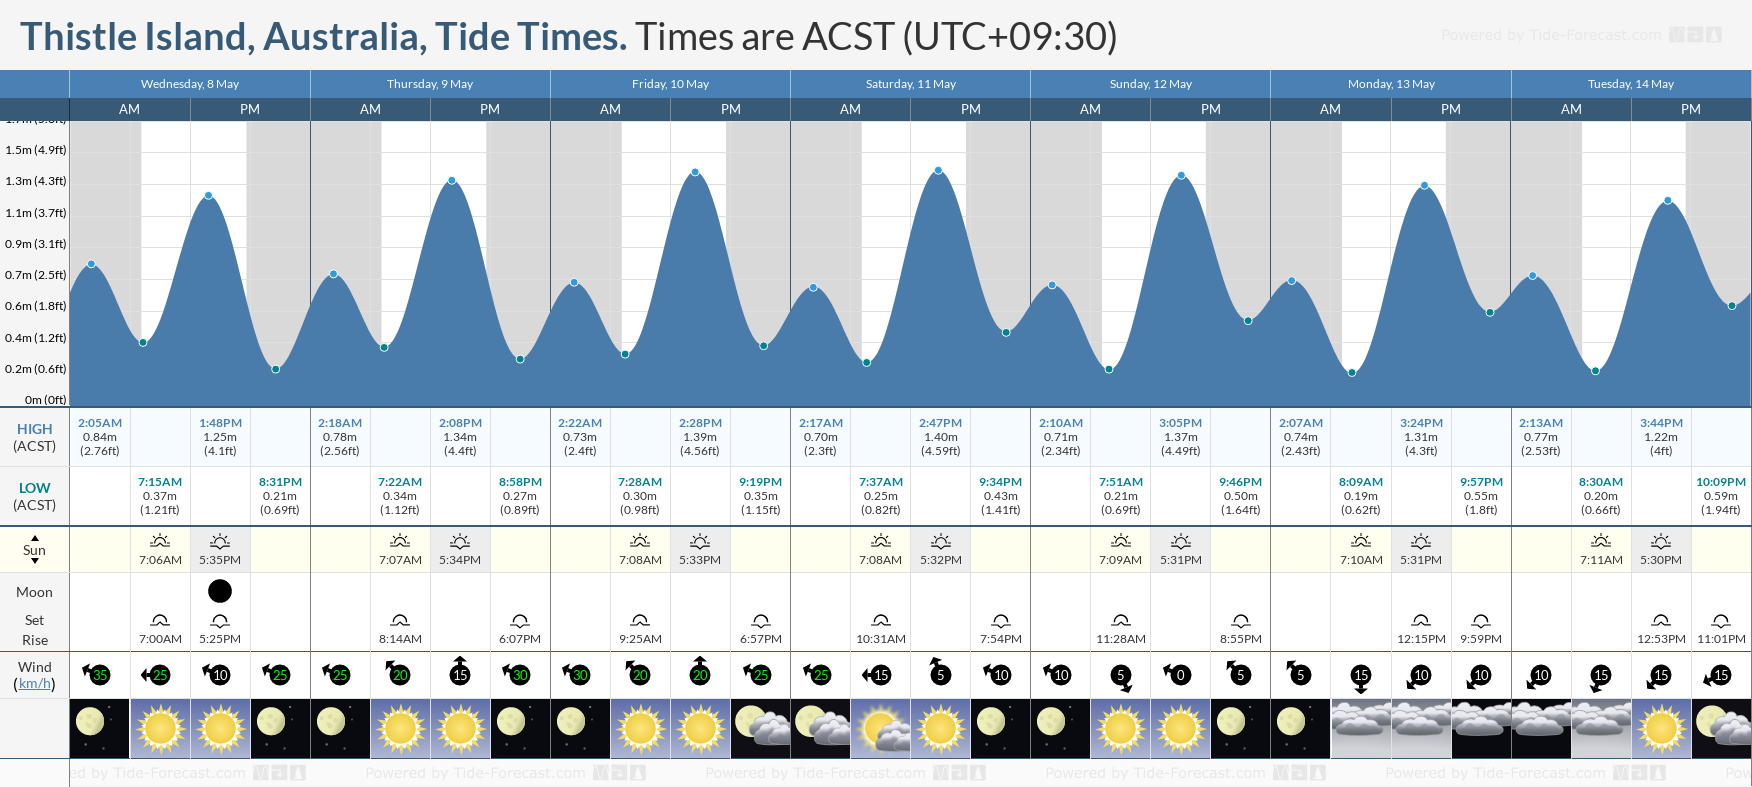 Thistle Island, Australia Tide Chart including high and low tide tide times for the next 7 days